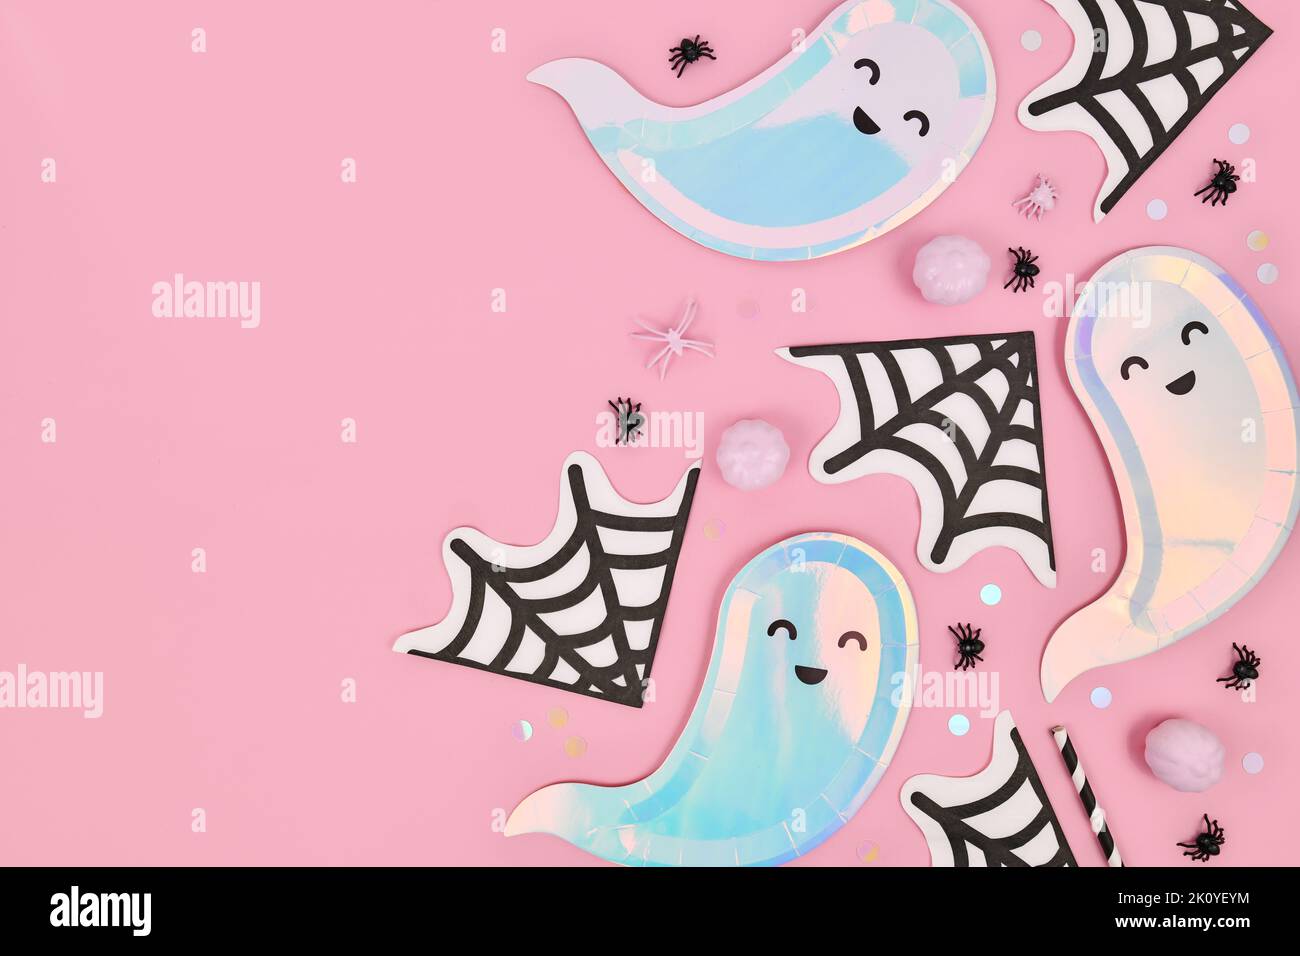 Cute pastel colored Halloween party flat lay with ghost shaped plates, spider web napkins and confetti on pink background Stock Photo